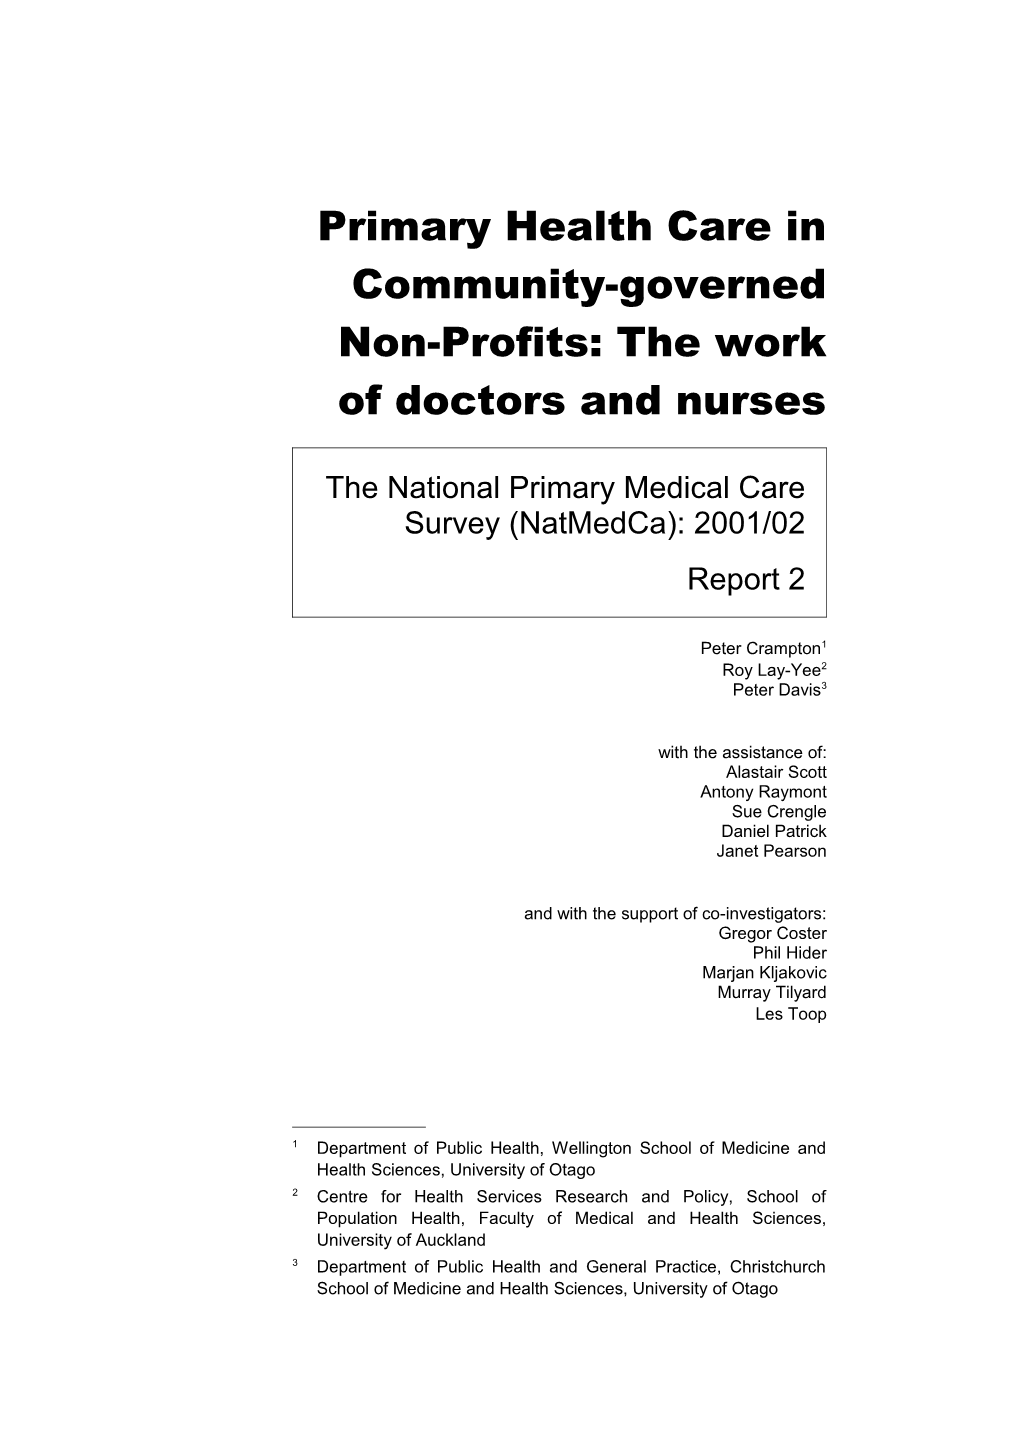 Primary Health Care in Community-Governed Non-Profits: the Work of Doctors and Nurses